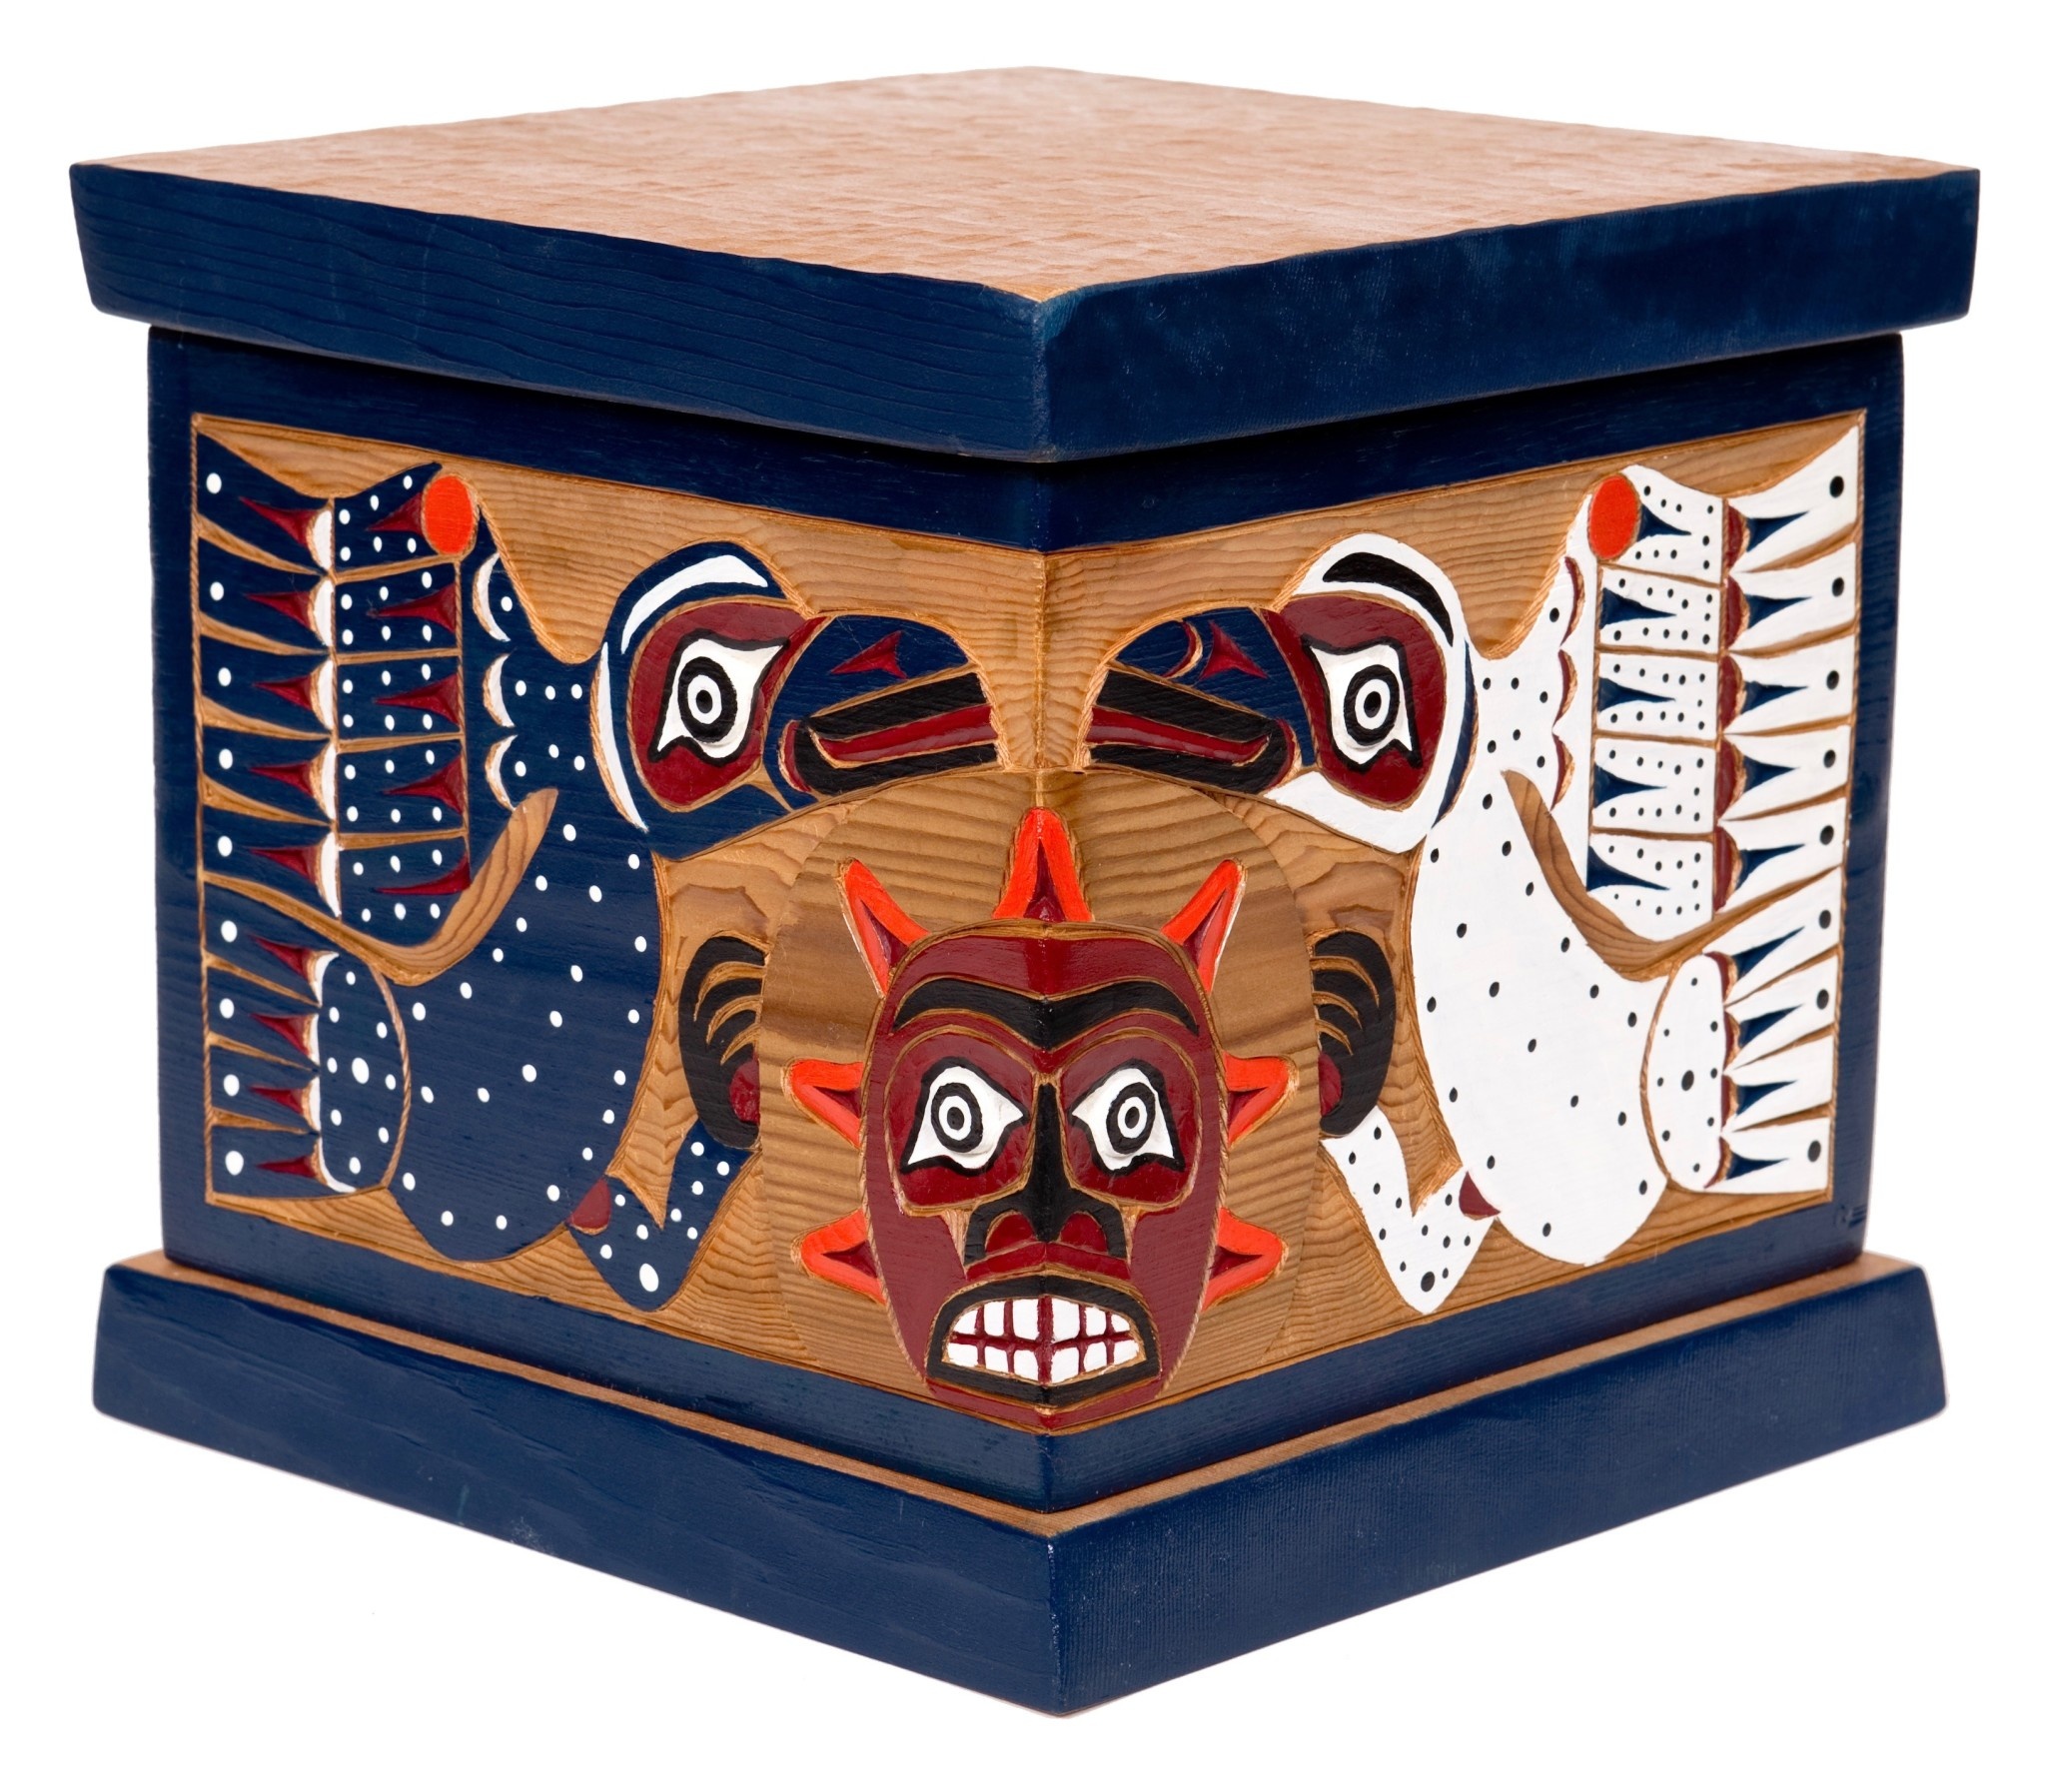 Steam bent box constructed, carved and painted with Traditional Coast Salish design - Frog, Wolf, Human.  10" square.